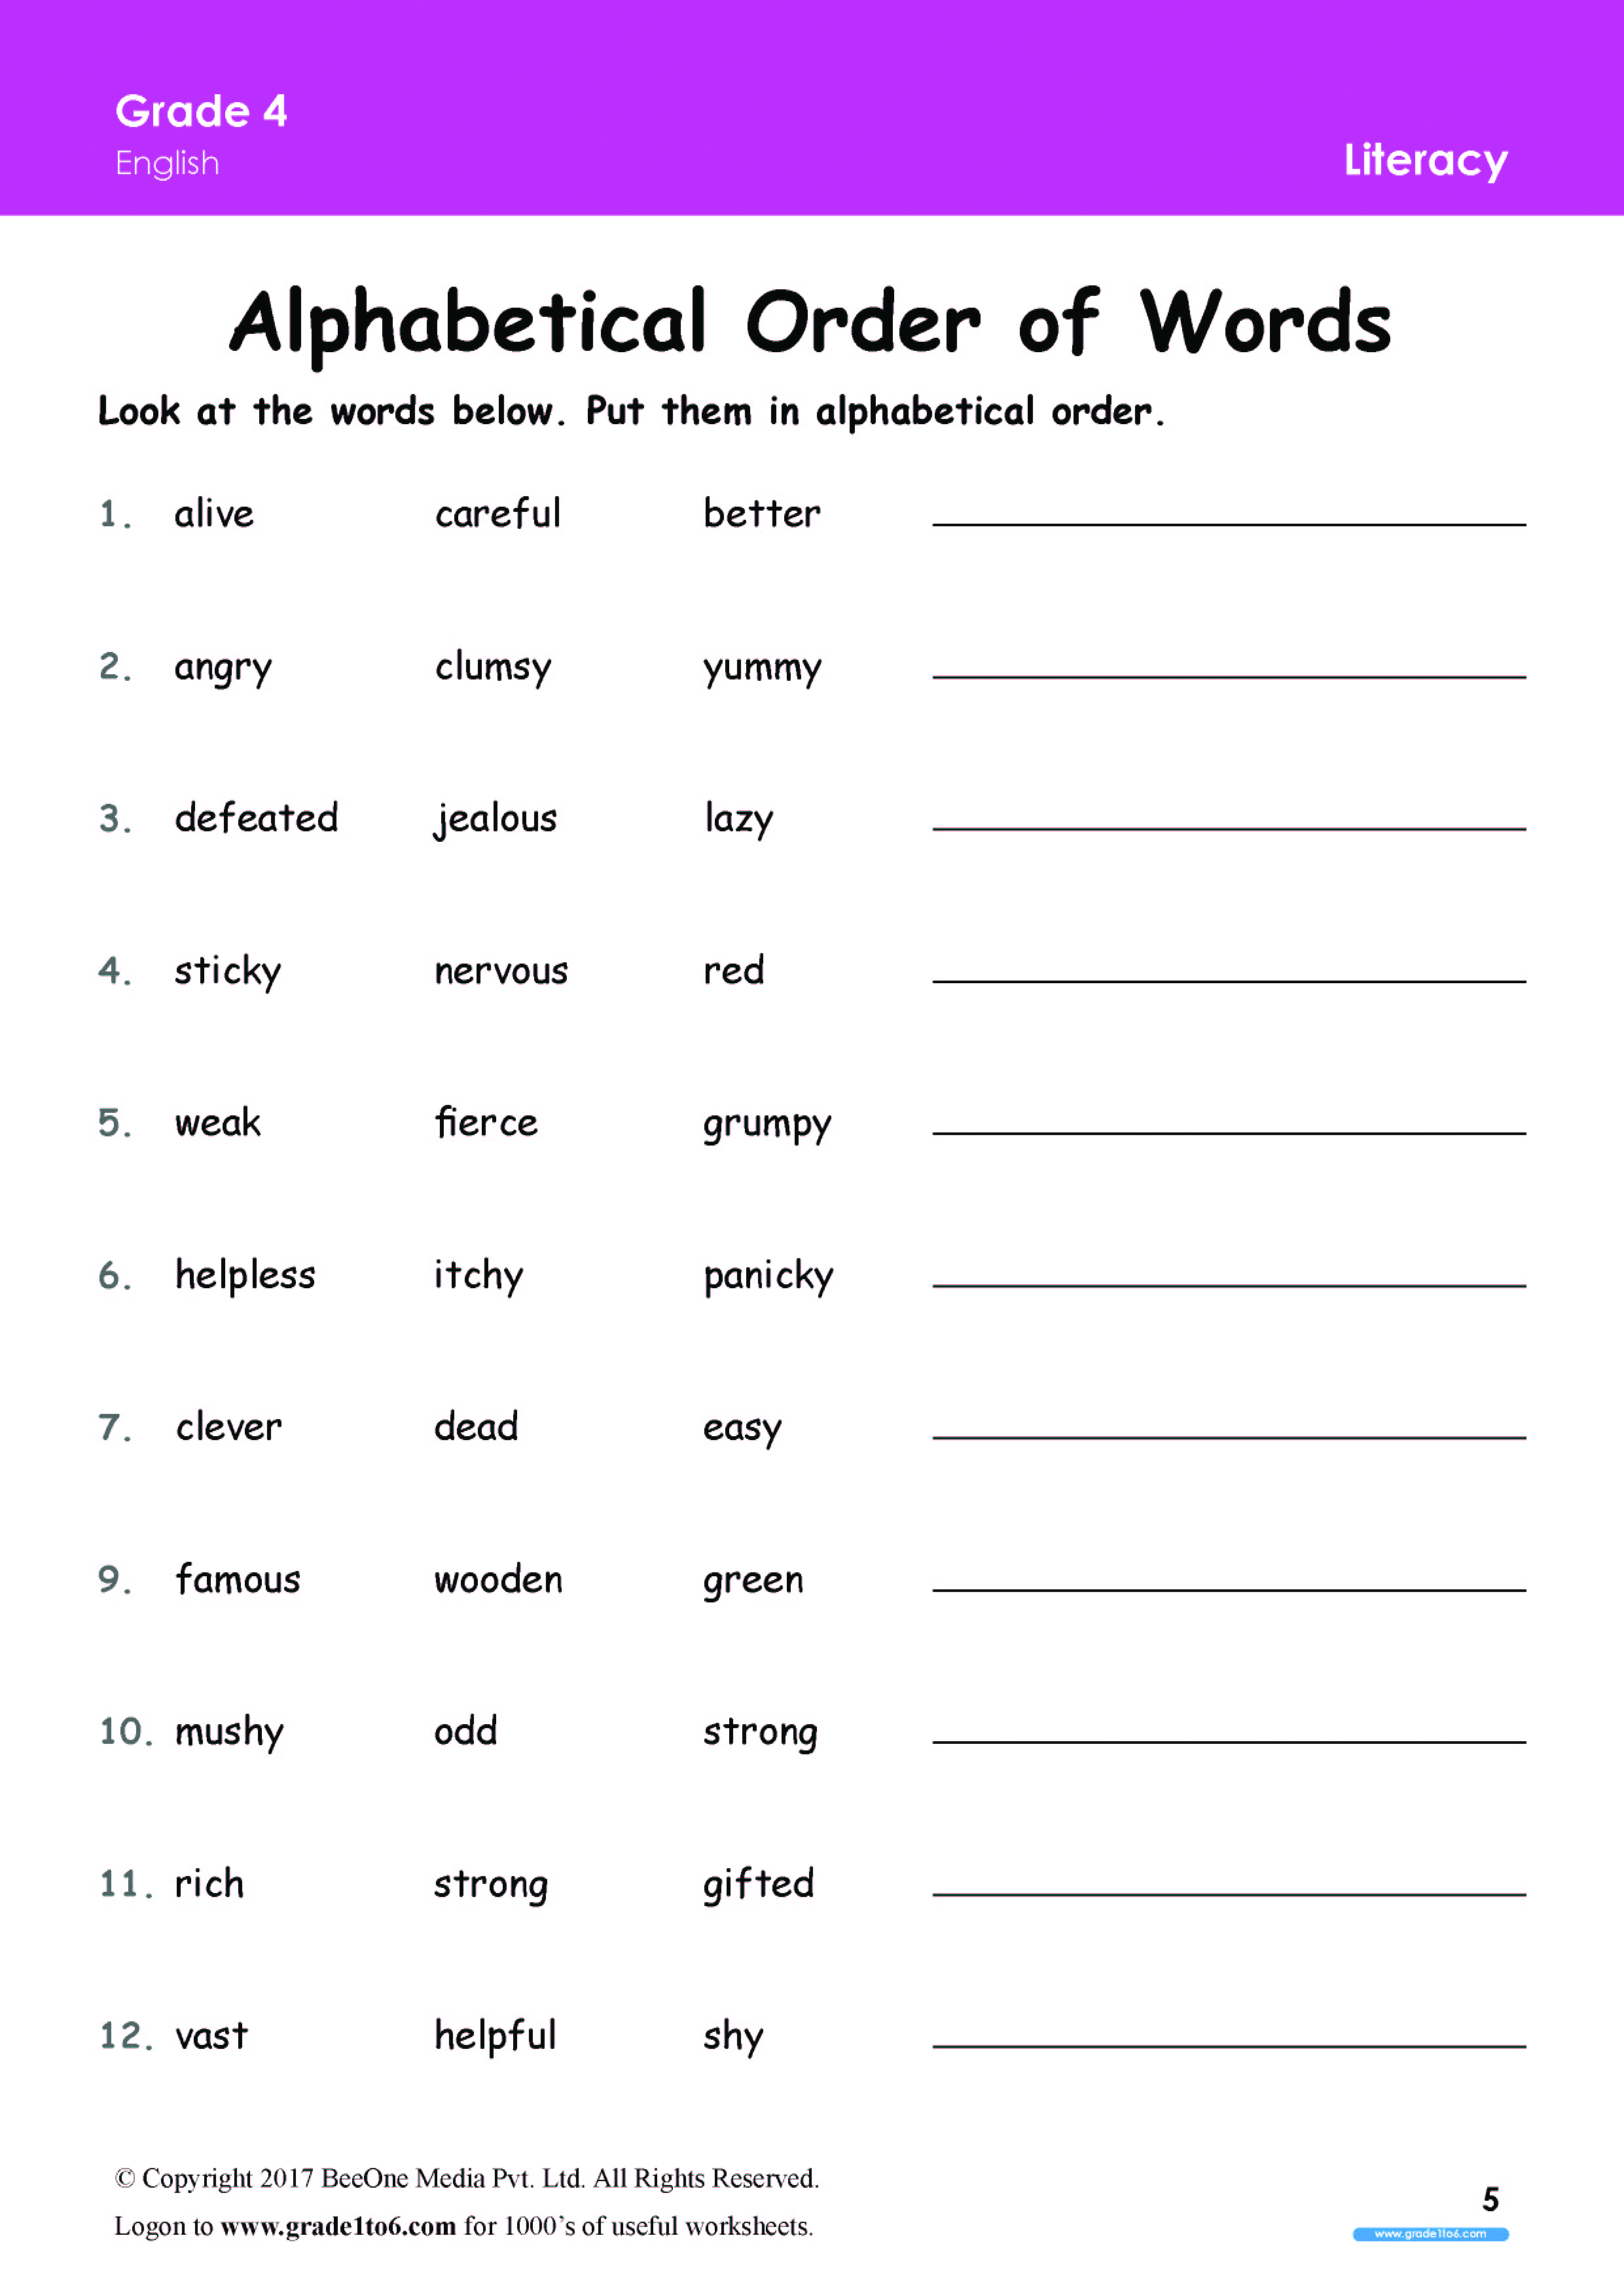 alphabetical-order-worksheets-for-grade-5-free-a-simple-chart-mainly